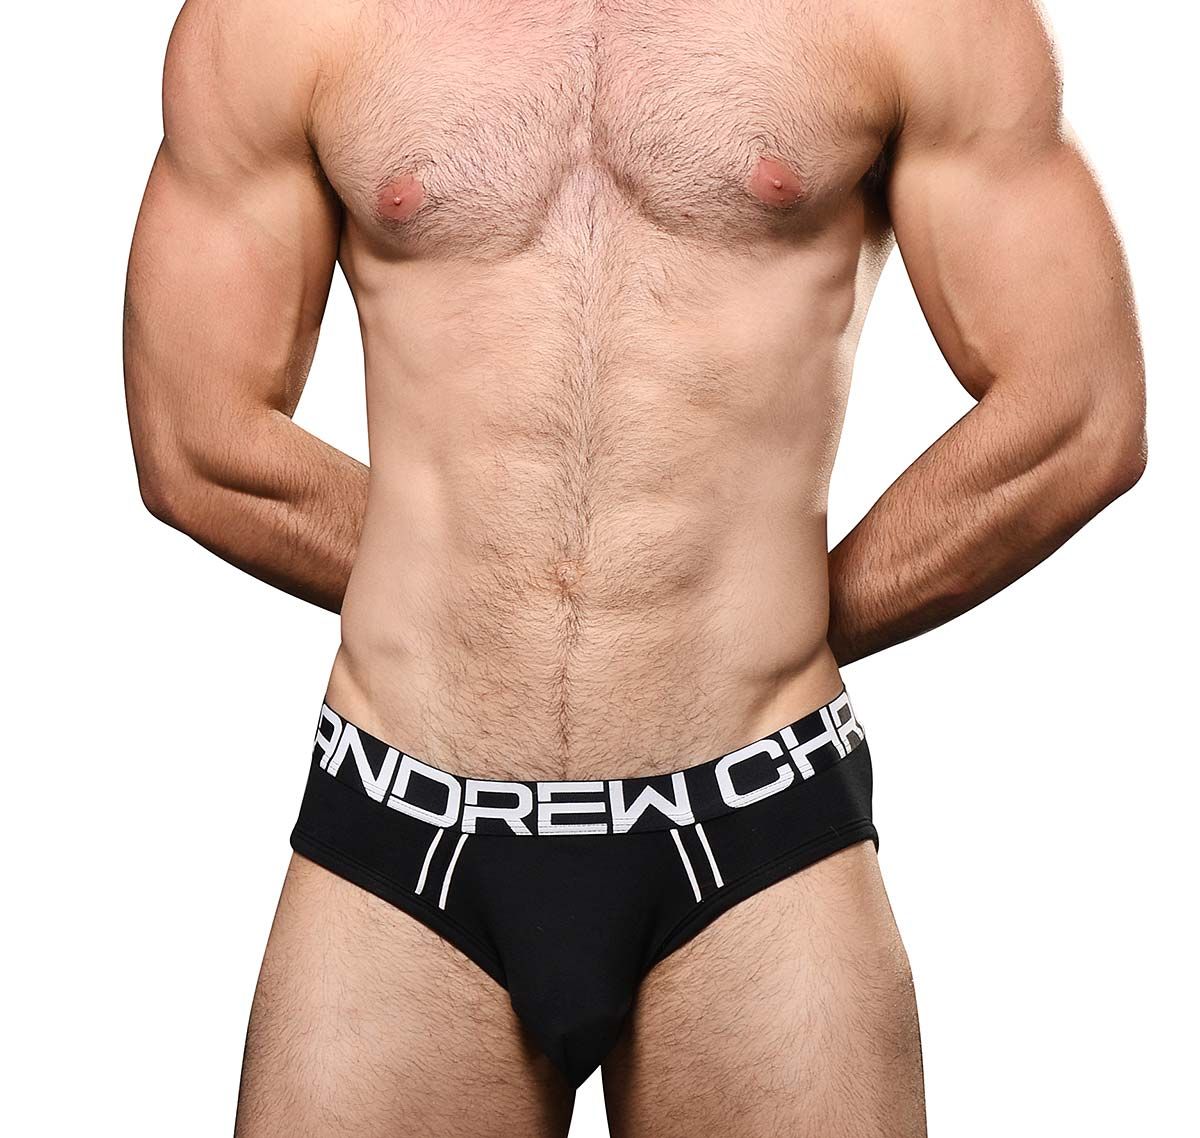 Andrew Christian Slip TROPHY BOY FOR HUNG GUYS BRIEF 93007, nero